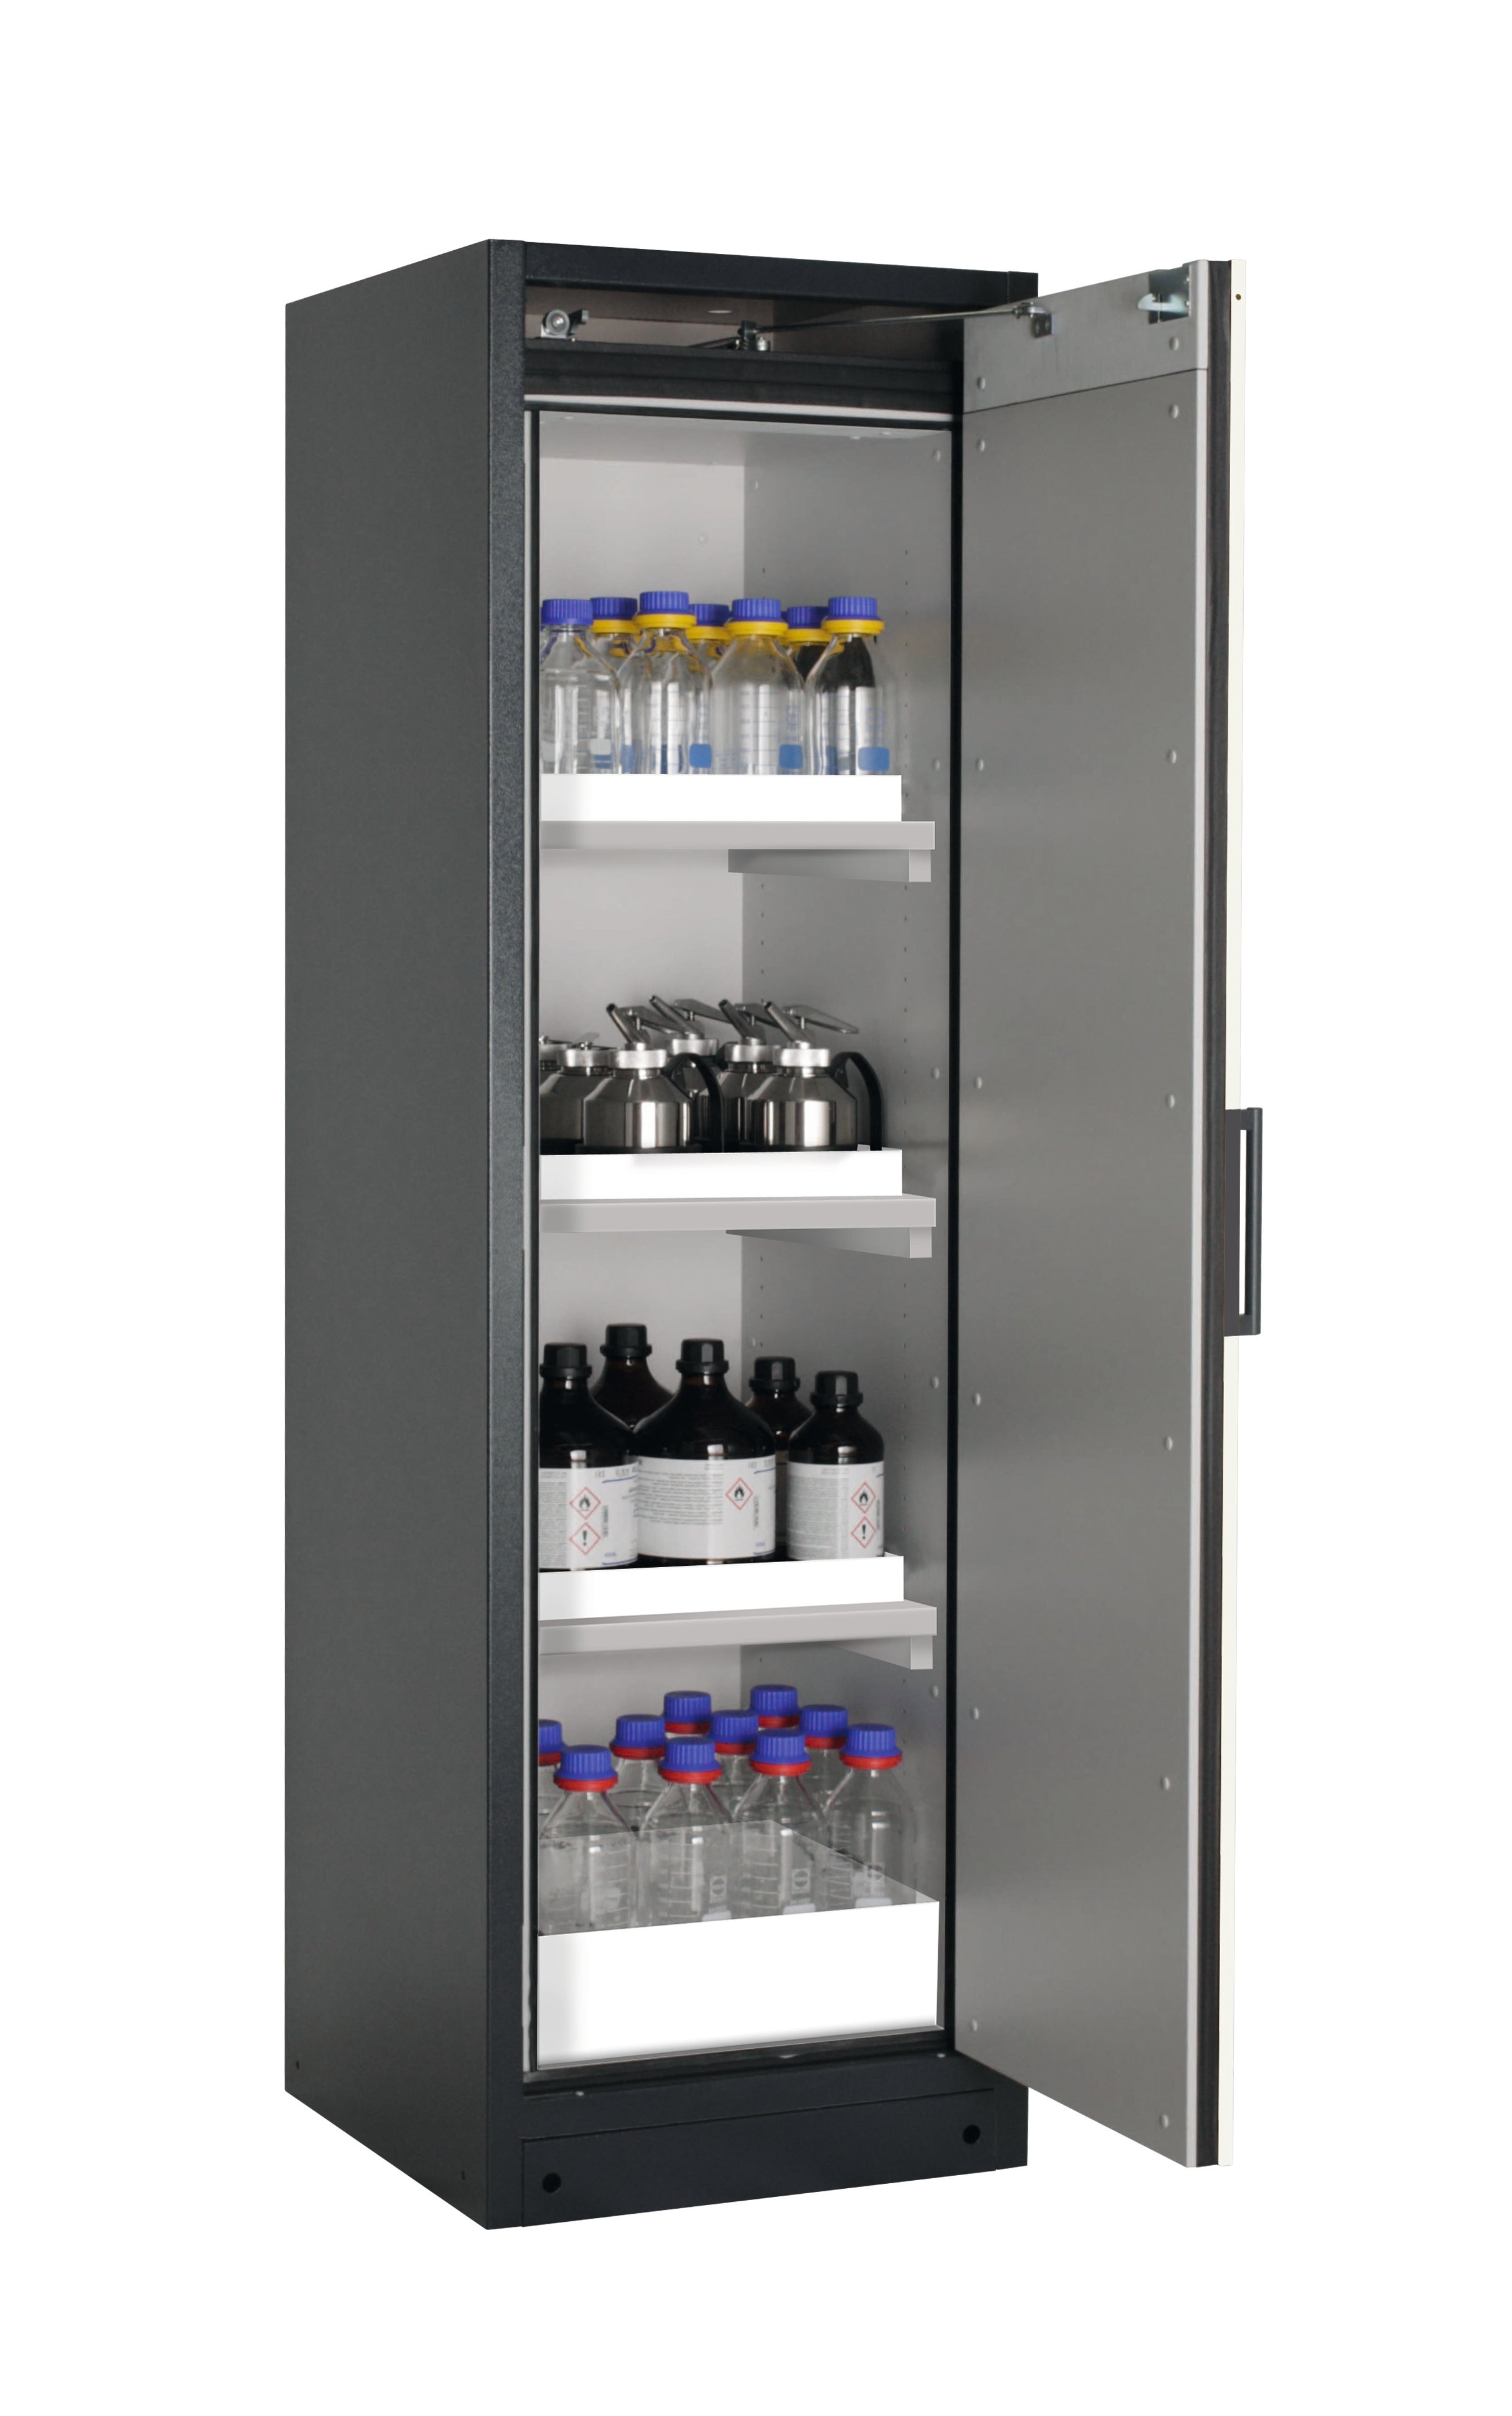 Type 90 safety storage cabinet Q-CLASSIC-90 model Q90.195.060.R in asecos silver with 3x tray shelf (standard) (polypropylene),